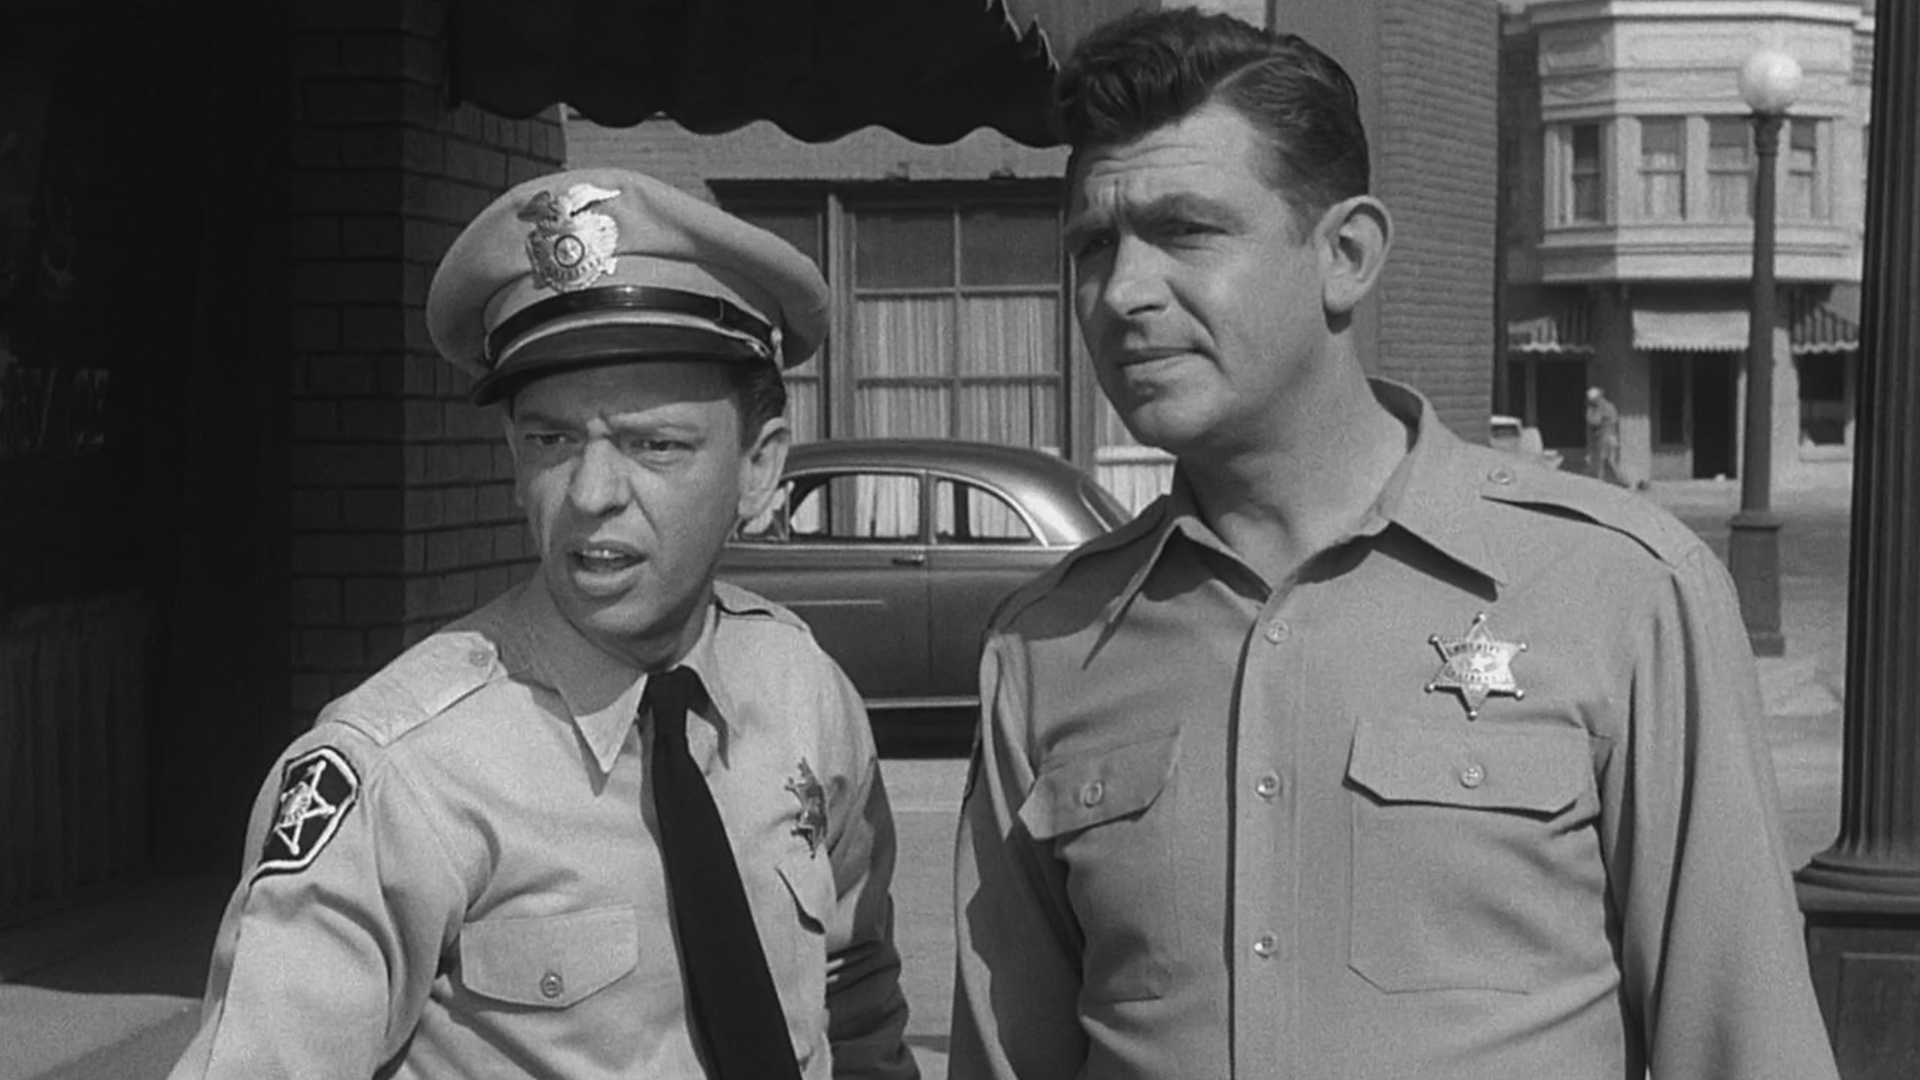 Where Was The Andy Griffith Show Filmed?